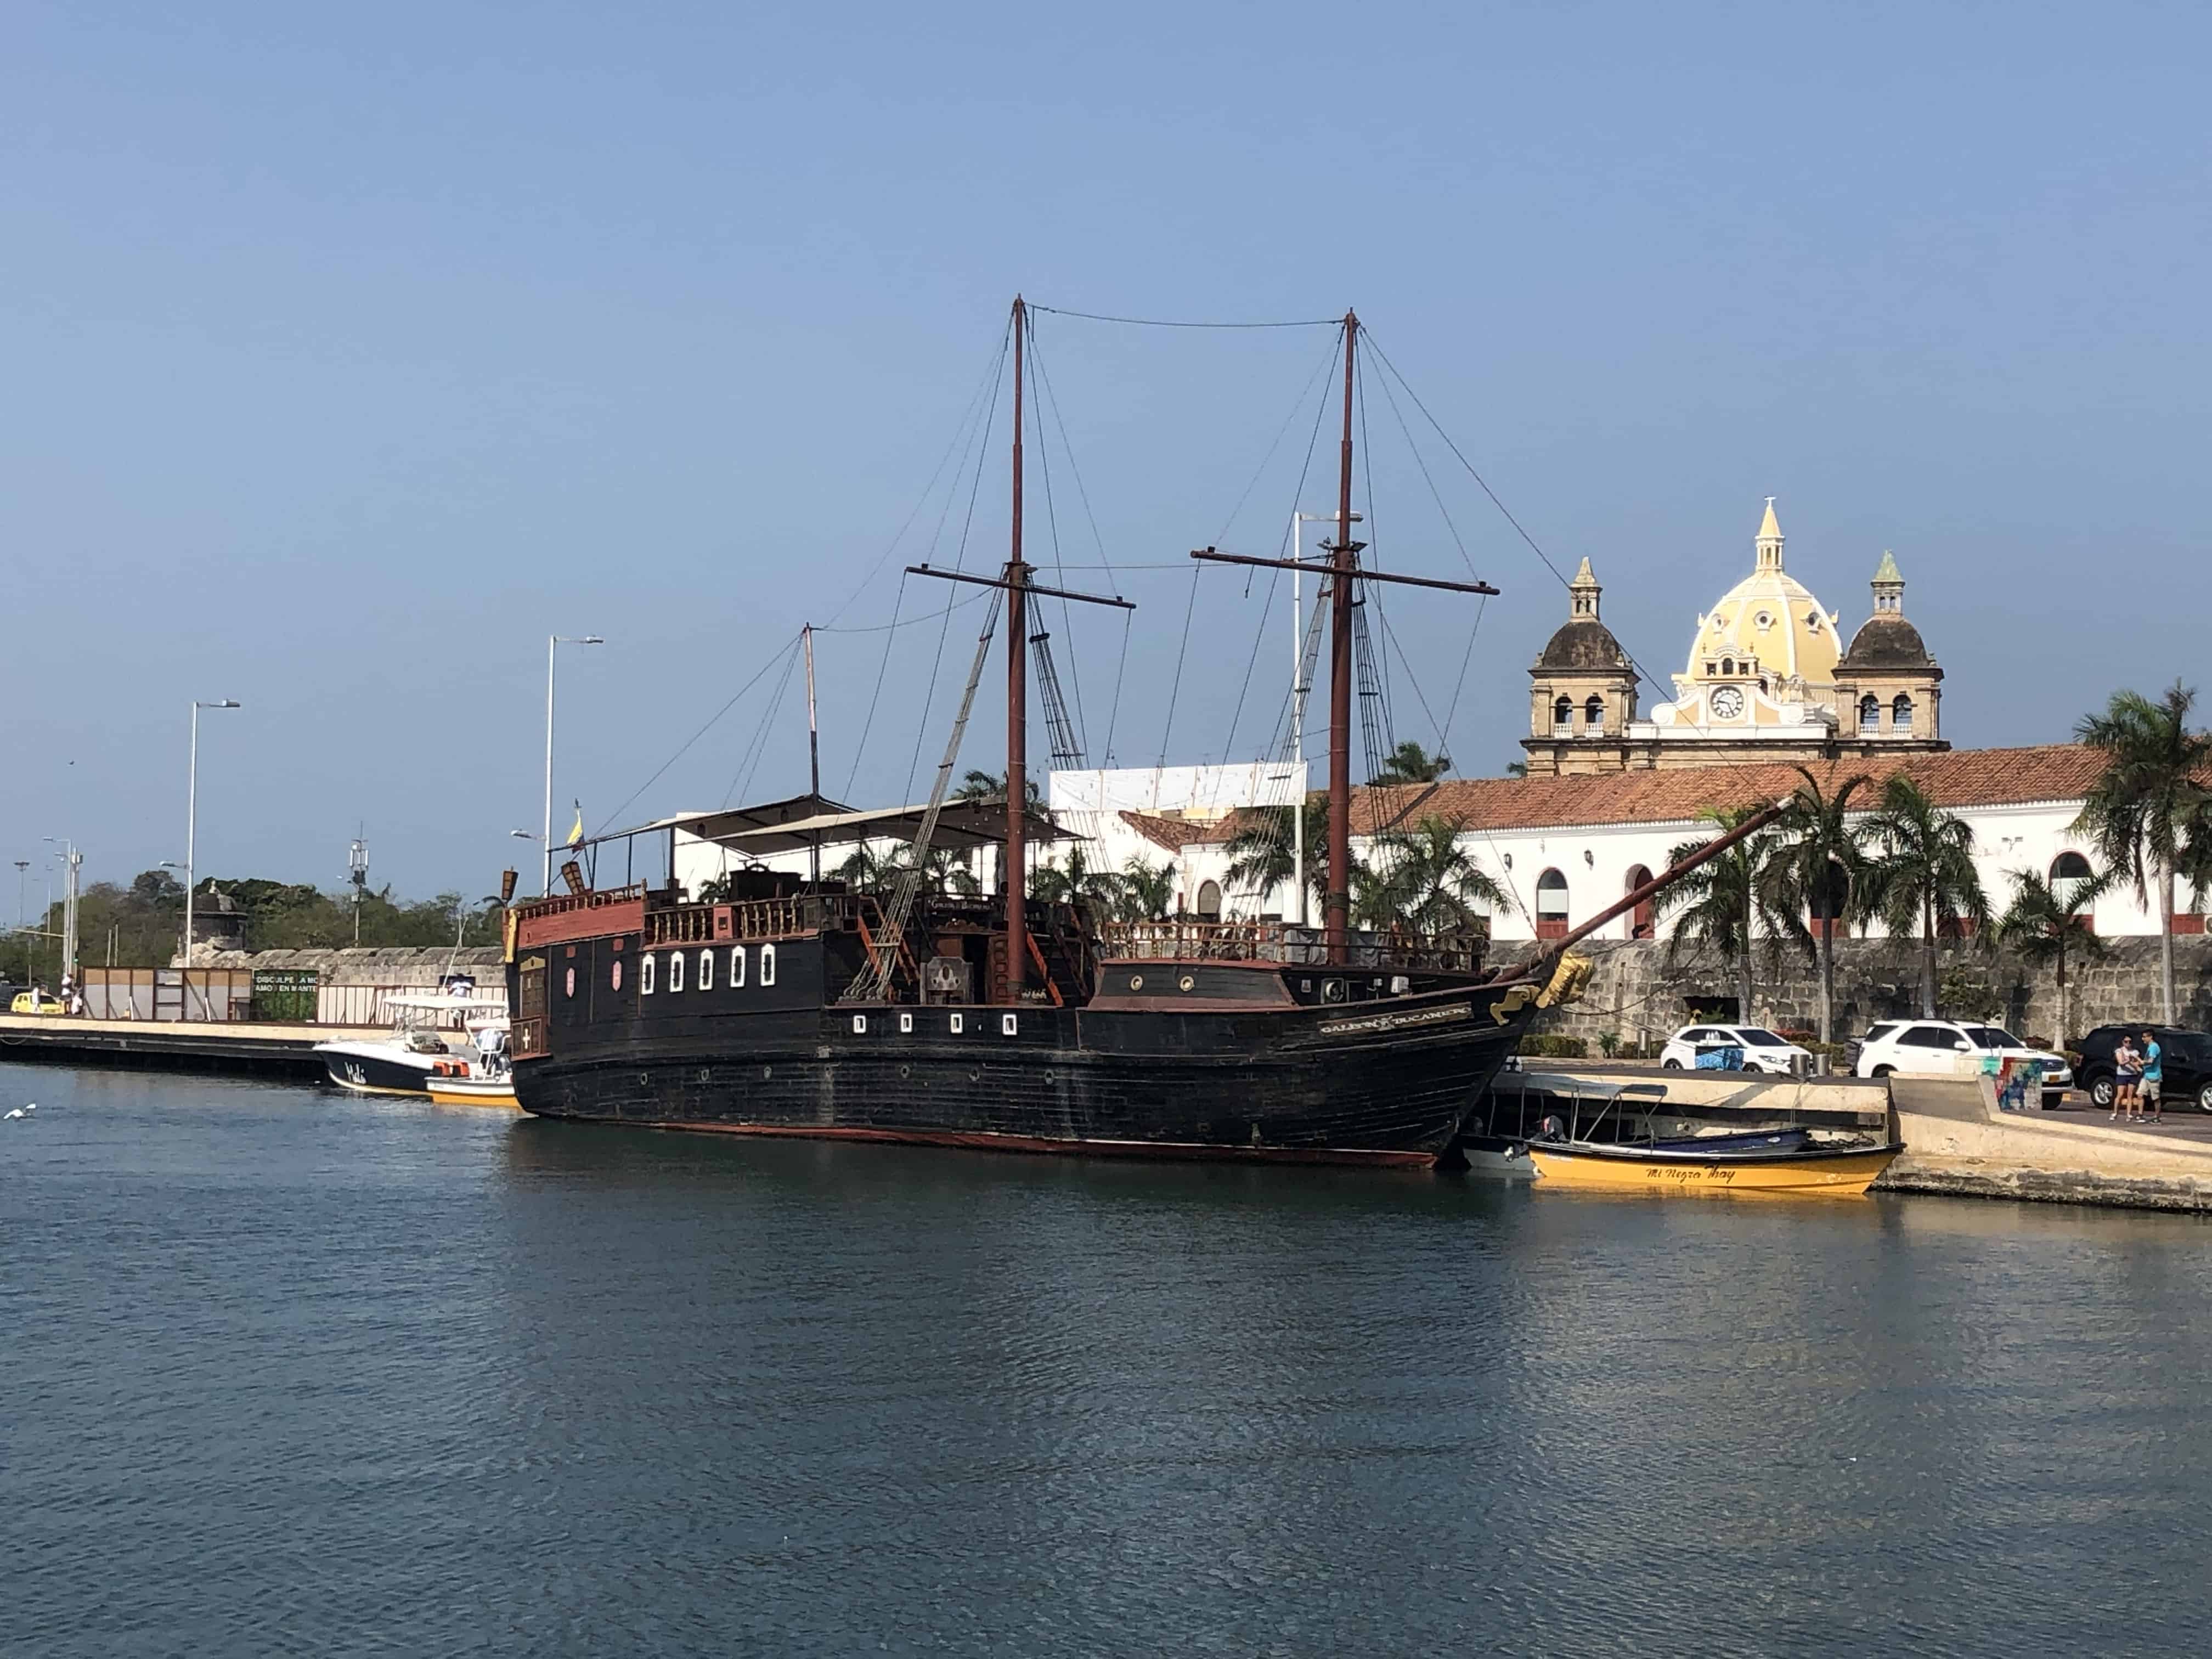 Pirate Ship Museum in Cartagena, Colombia